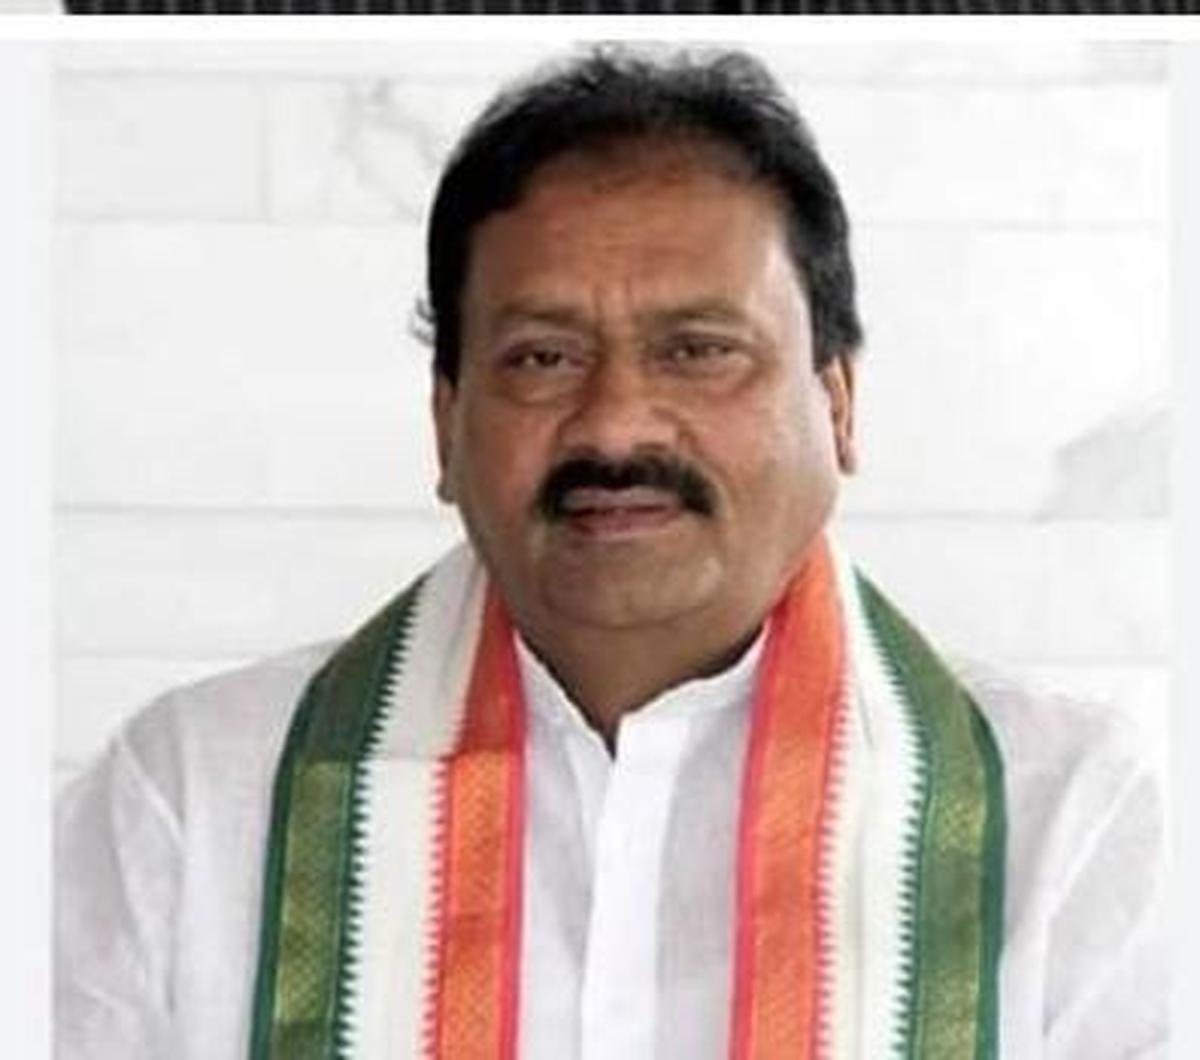 Former Minister Shabbir Ali has been appointed as Advisor to SC, ST, BC and Minority departments of Government of Telangana. Photo: Special Arrangement